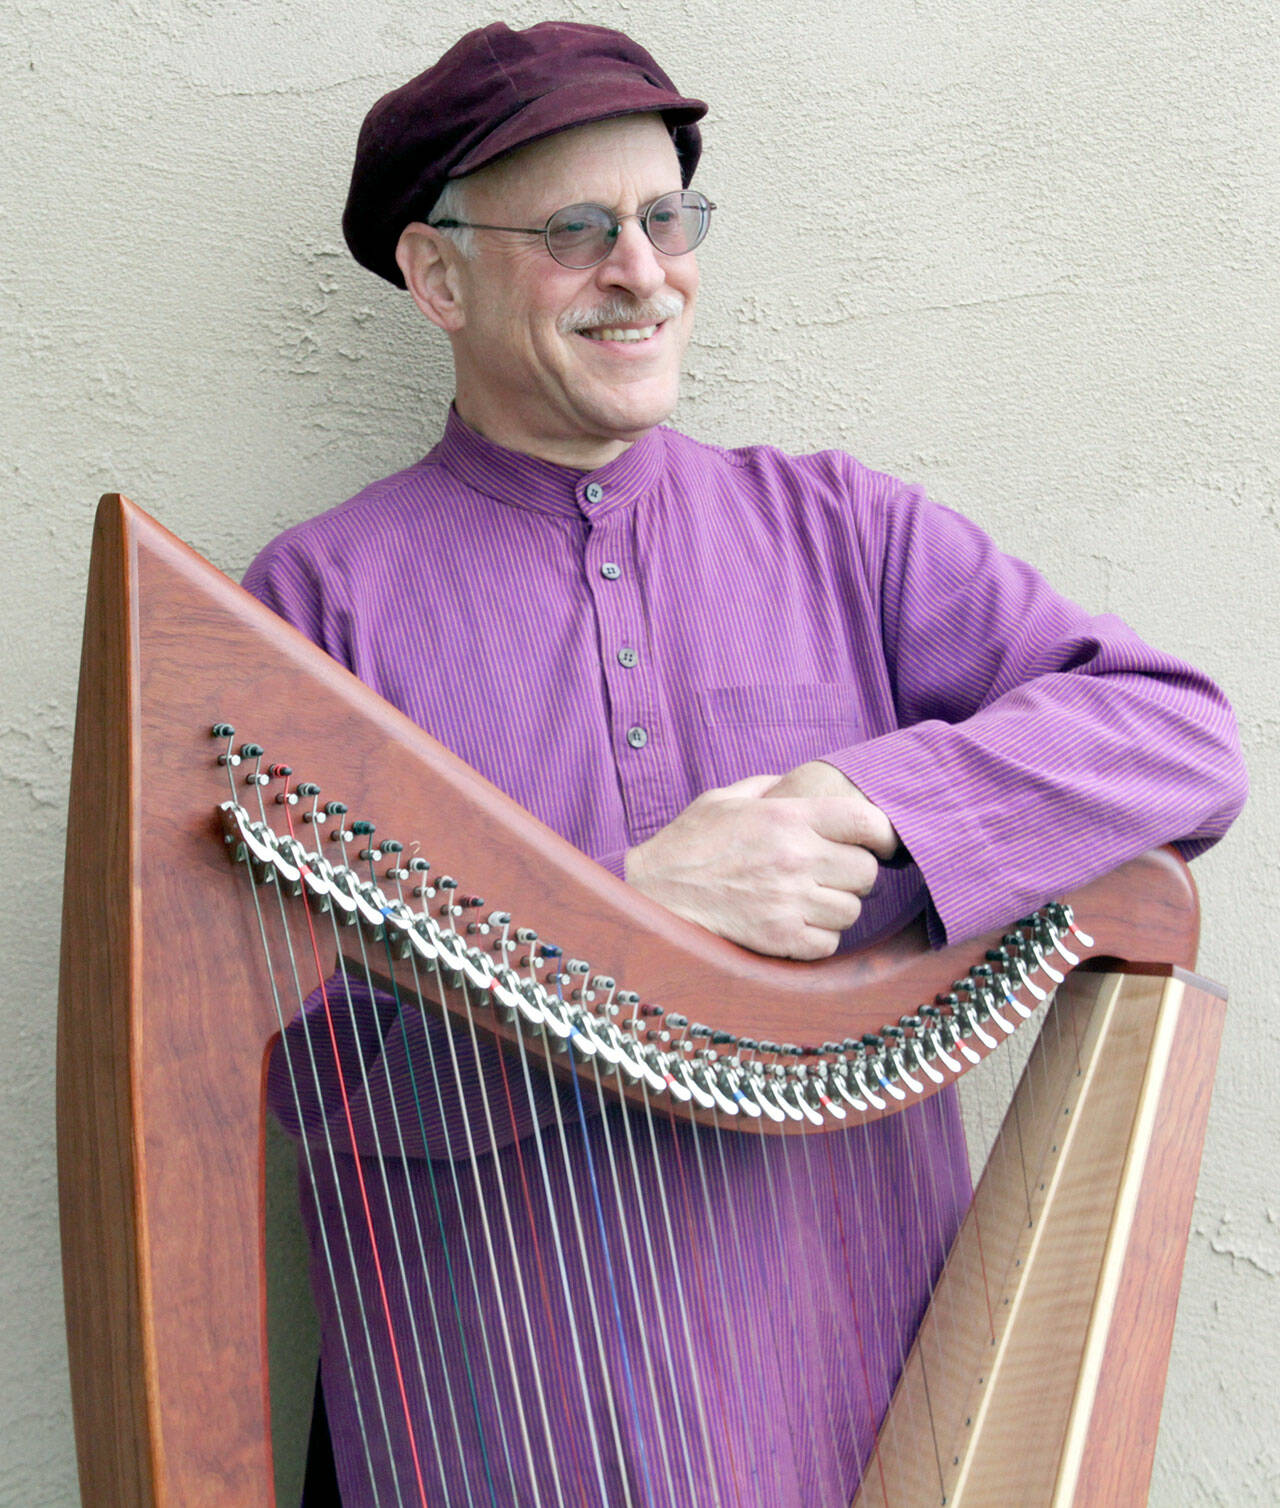 Harpist David Michael’s latest album is available for free streaming. (Photo courtesy Jesse Allen)